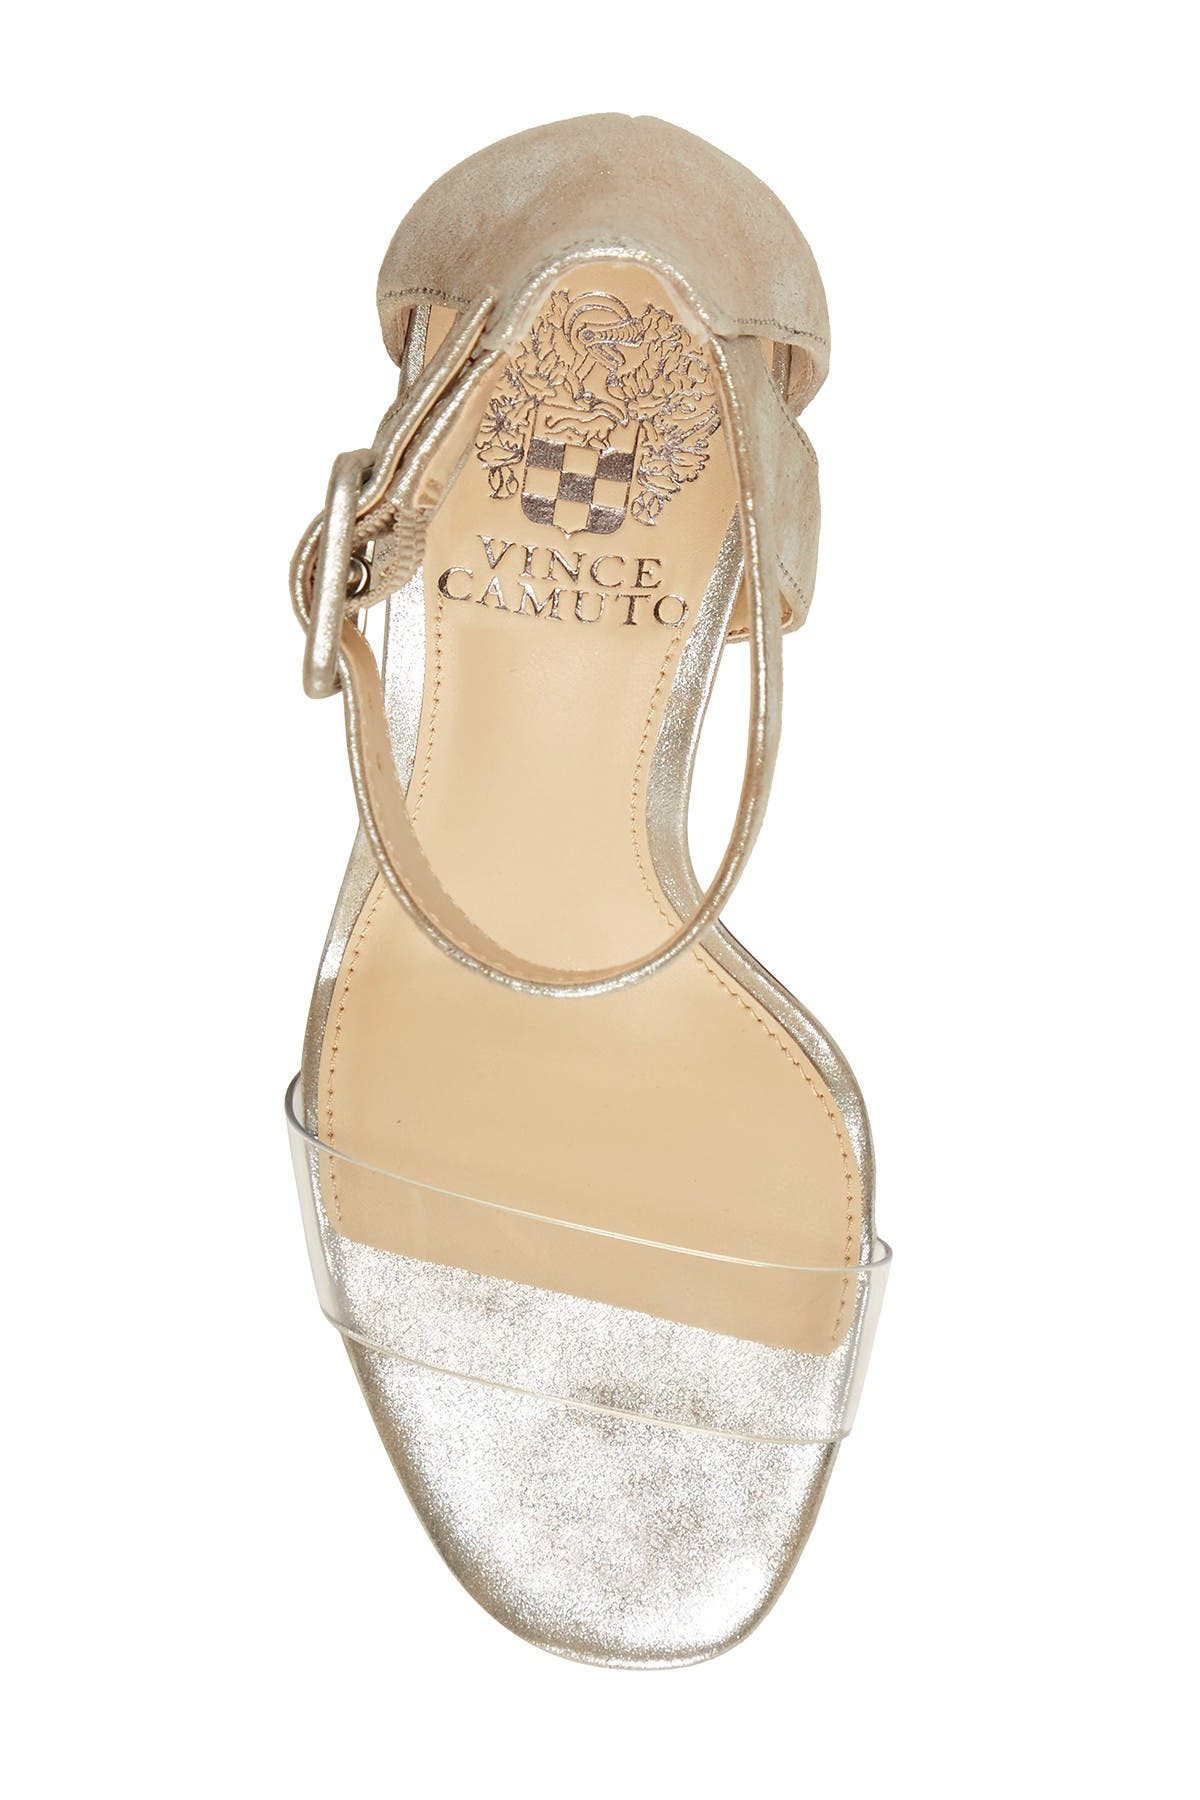 vince camuto bevvyn